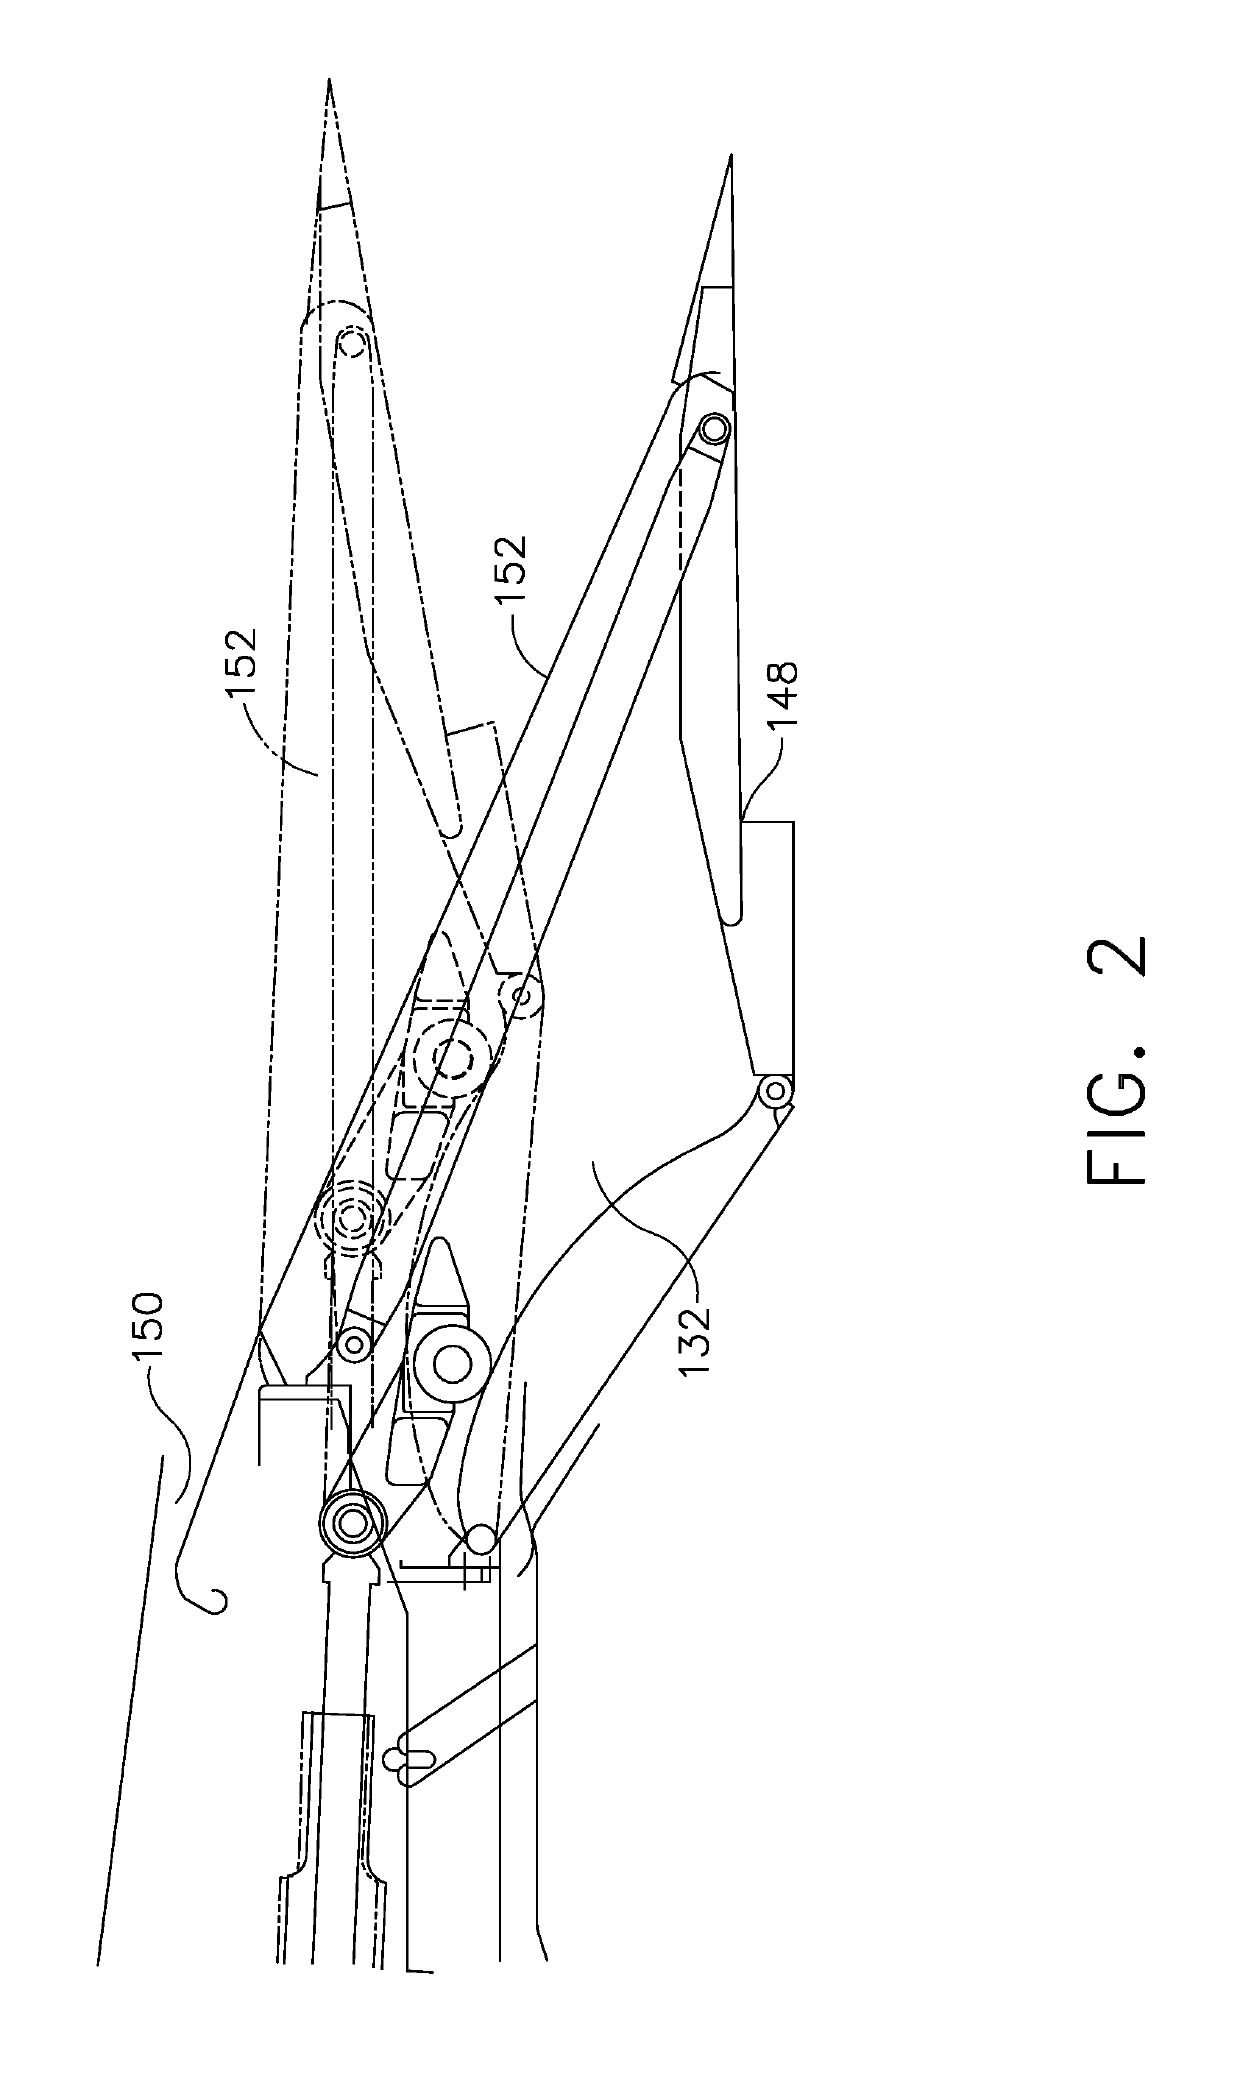 Secondary nozzle for jet engine